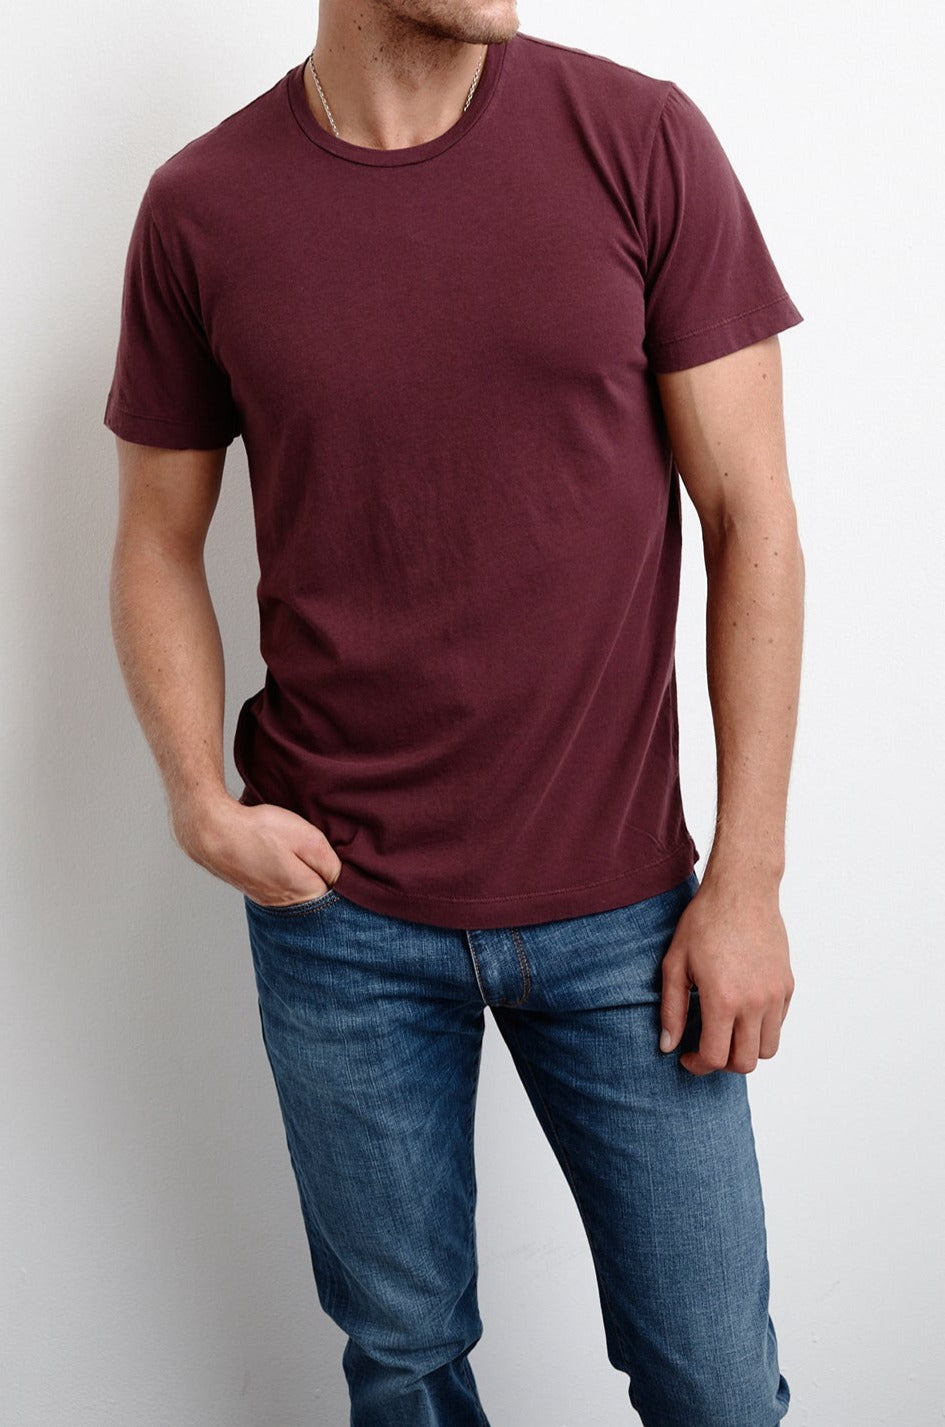 A man wearing the Velvet by Graham & Spencer HOWARD WHISPER CLASSIC CREW NECK TEE and jeans.-1012412153937